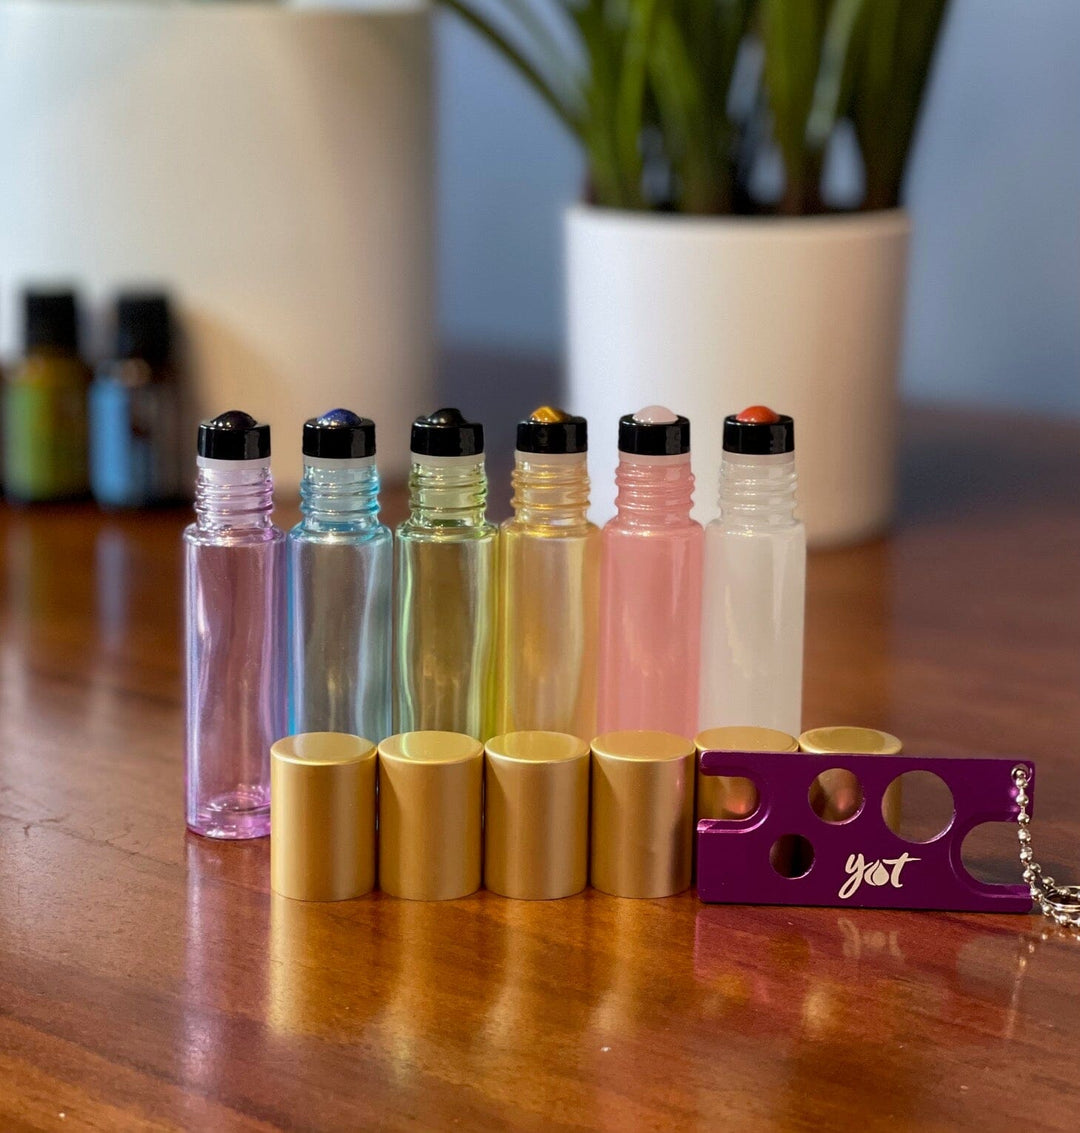 10ml Shimmer & Shine Glass Bottles W/Gem Stone Rollers and Gold Metal Caps Gift Box Roller Bottles Your Oil Tools 